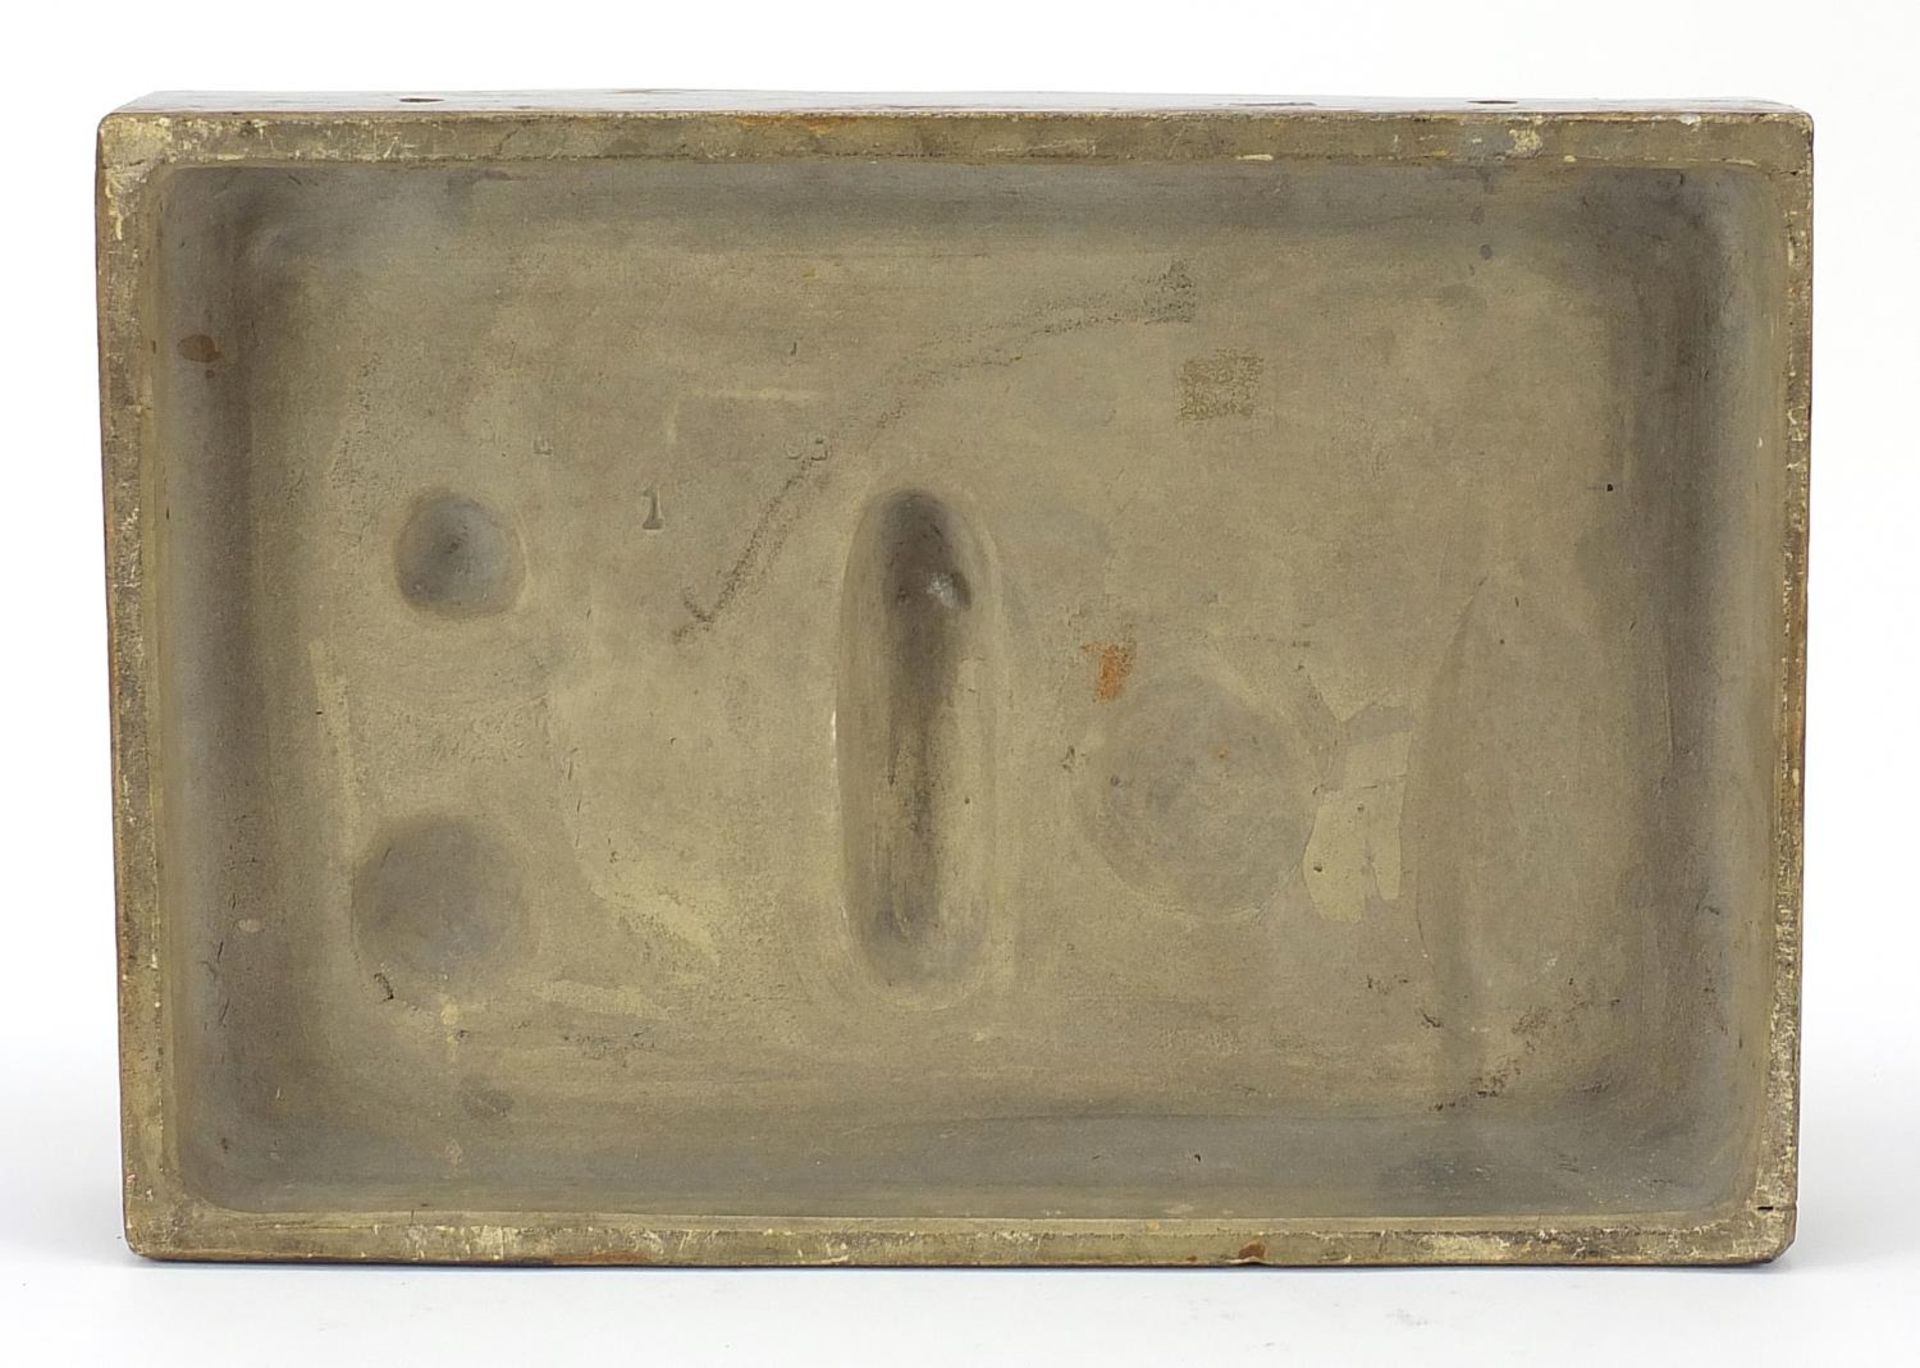 19th century Continental stoneware plaque decorated in relief with religious zealots burning - Image 5 of 8